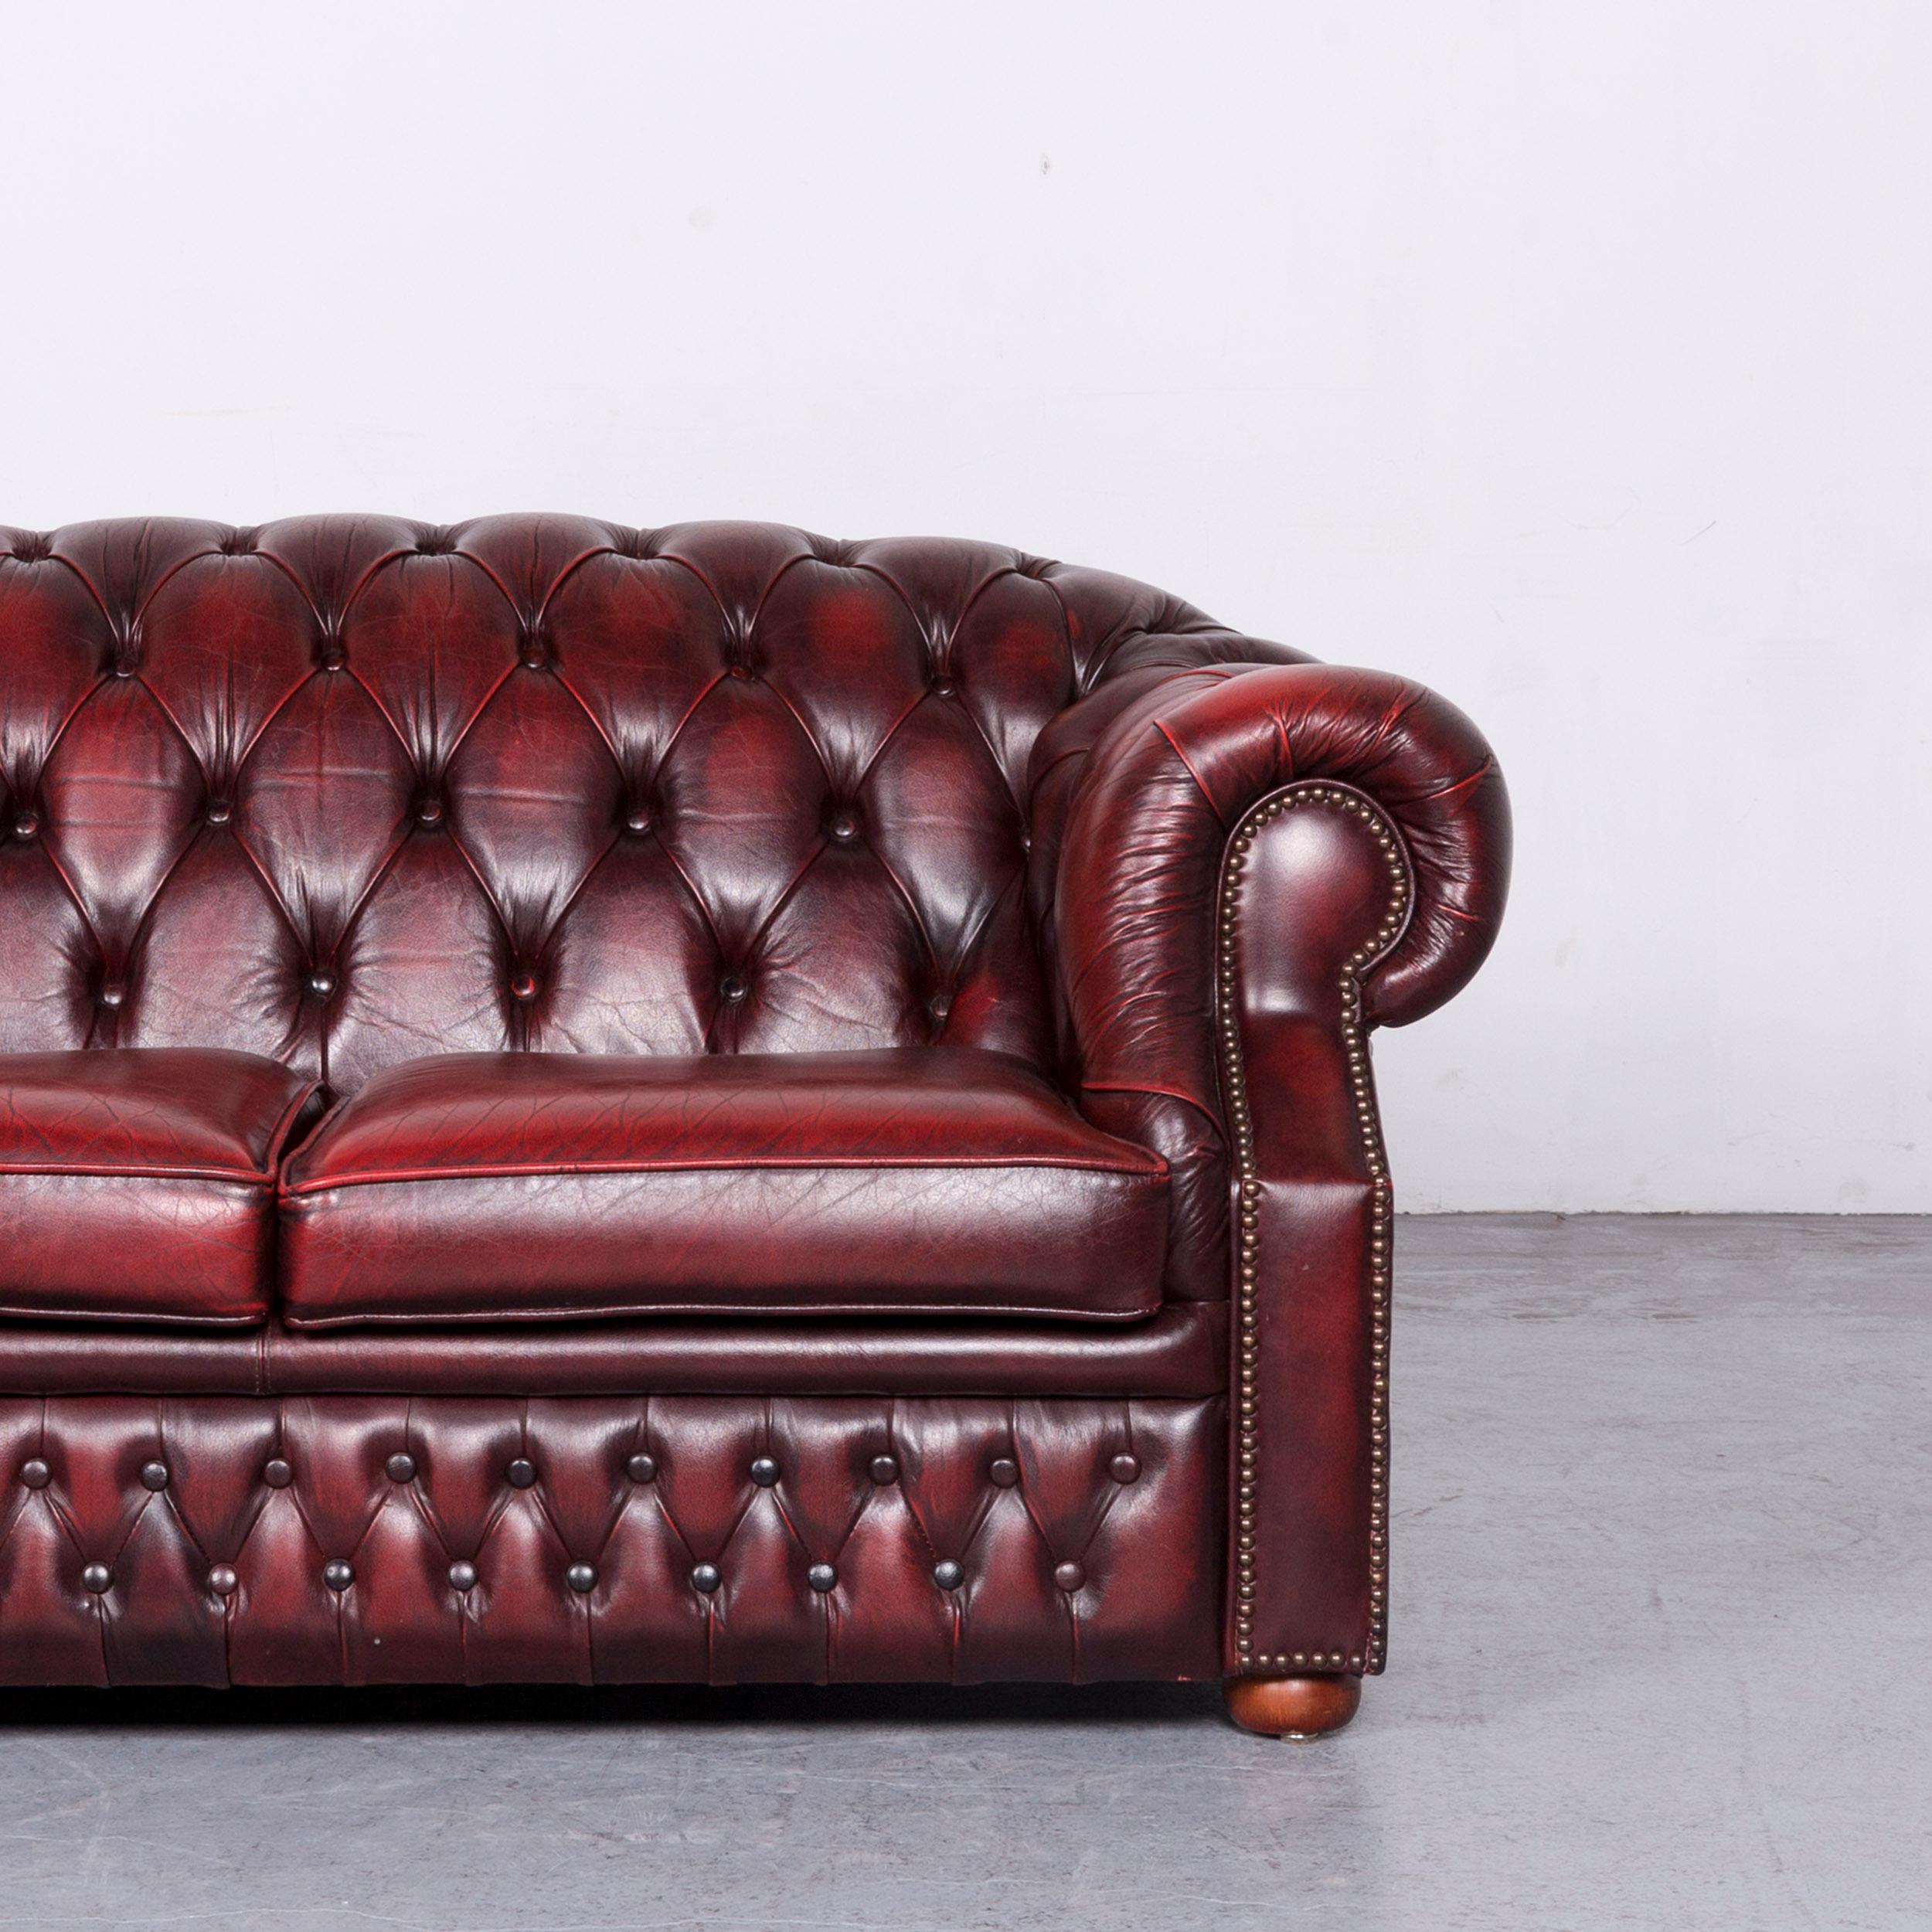 British Chesterfield Centurion Leather Sofa Red Two-Seat Vintage Couch